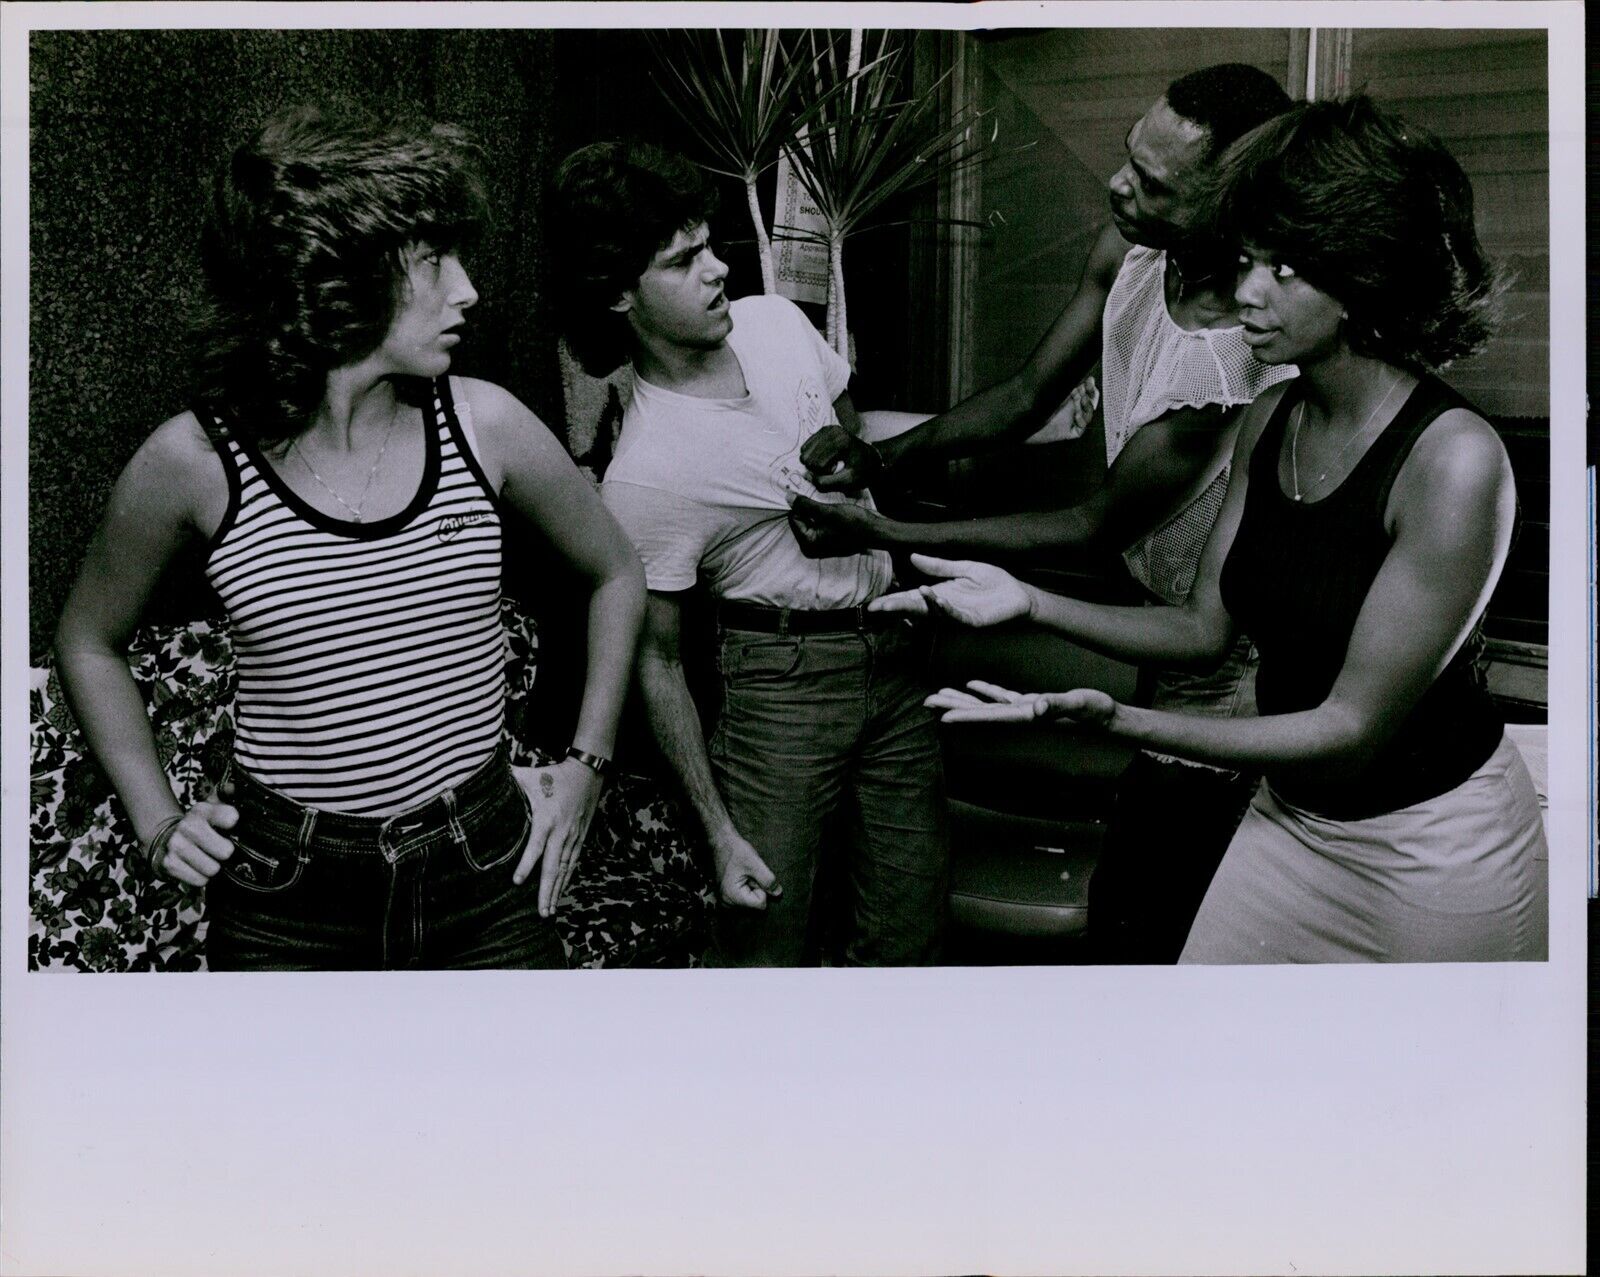 LG874 1983 Original Photo CONCEPT HOUSE Actors Rehearse Scene from Play Show